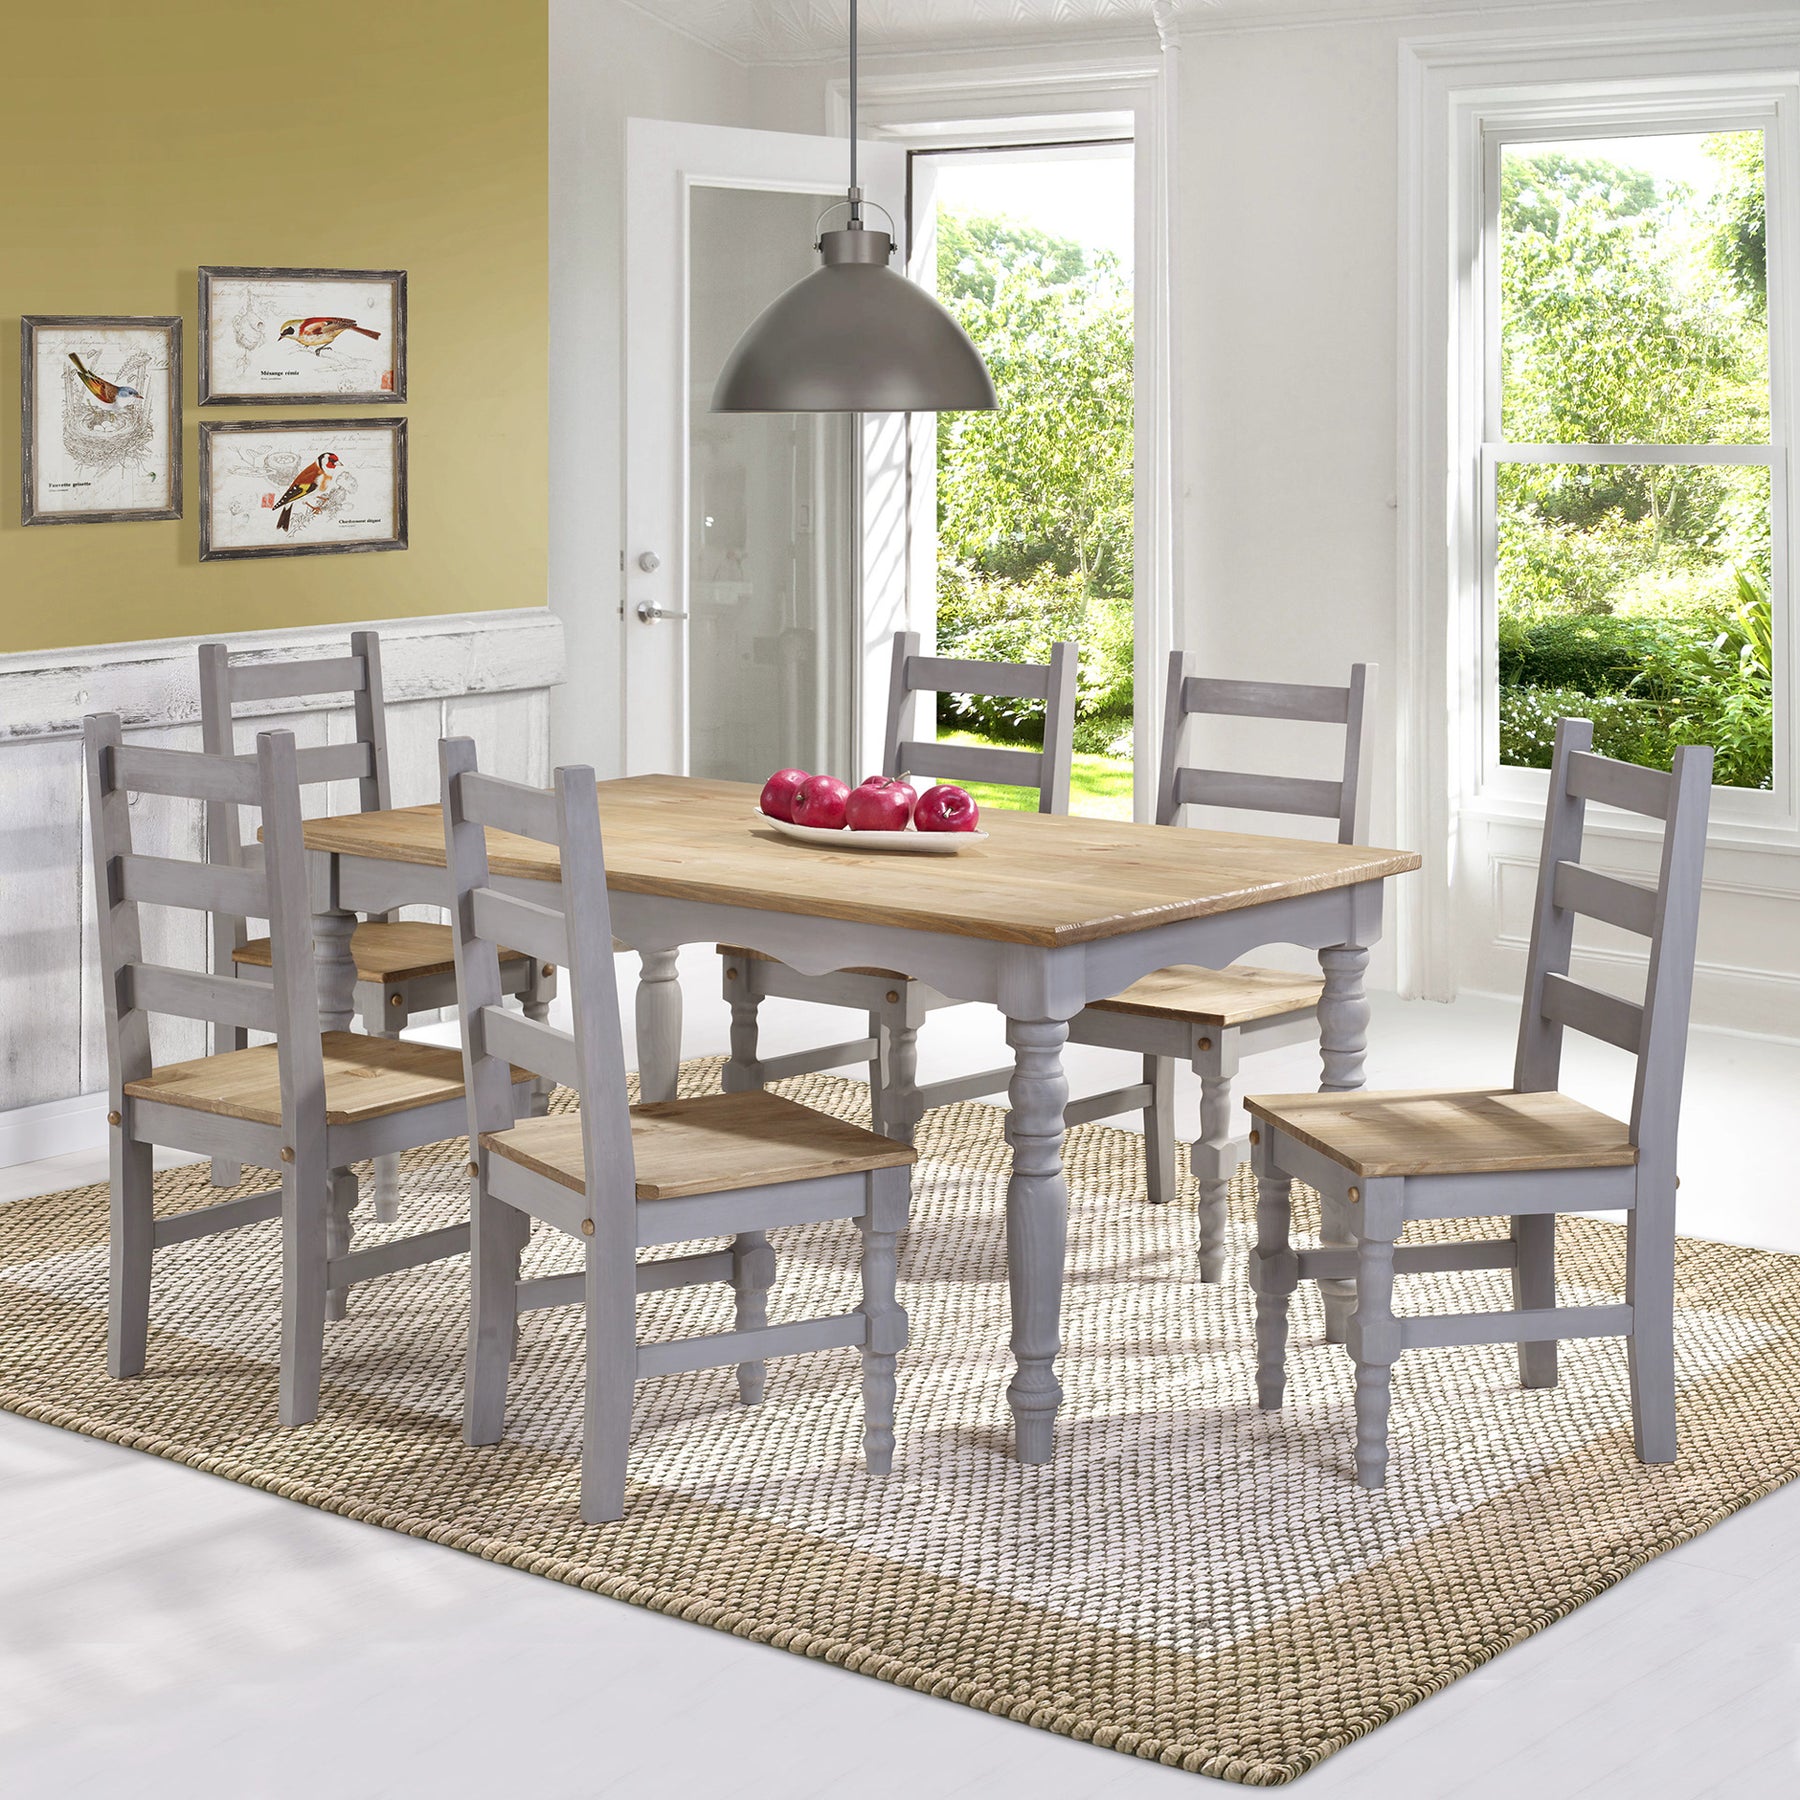 Manhattan Comfort Jay 7-Piece Solid Wood Dining Set with 6 Chairs and 1 Table in Gray Wash-Minimal & Modern